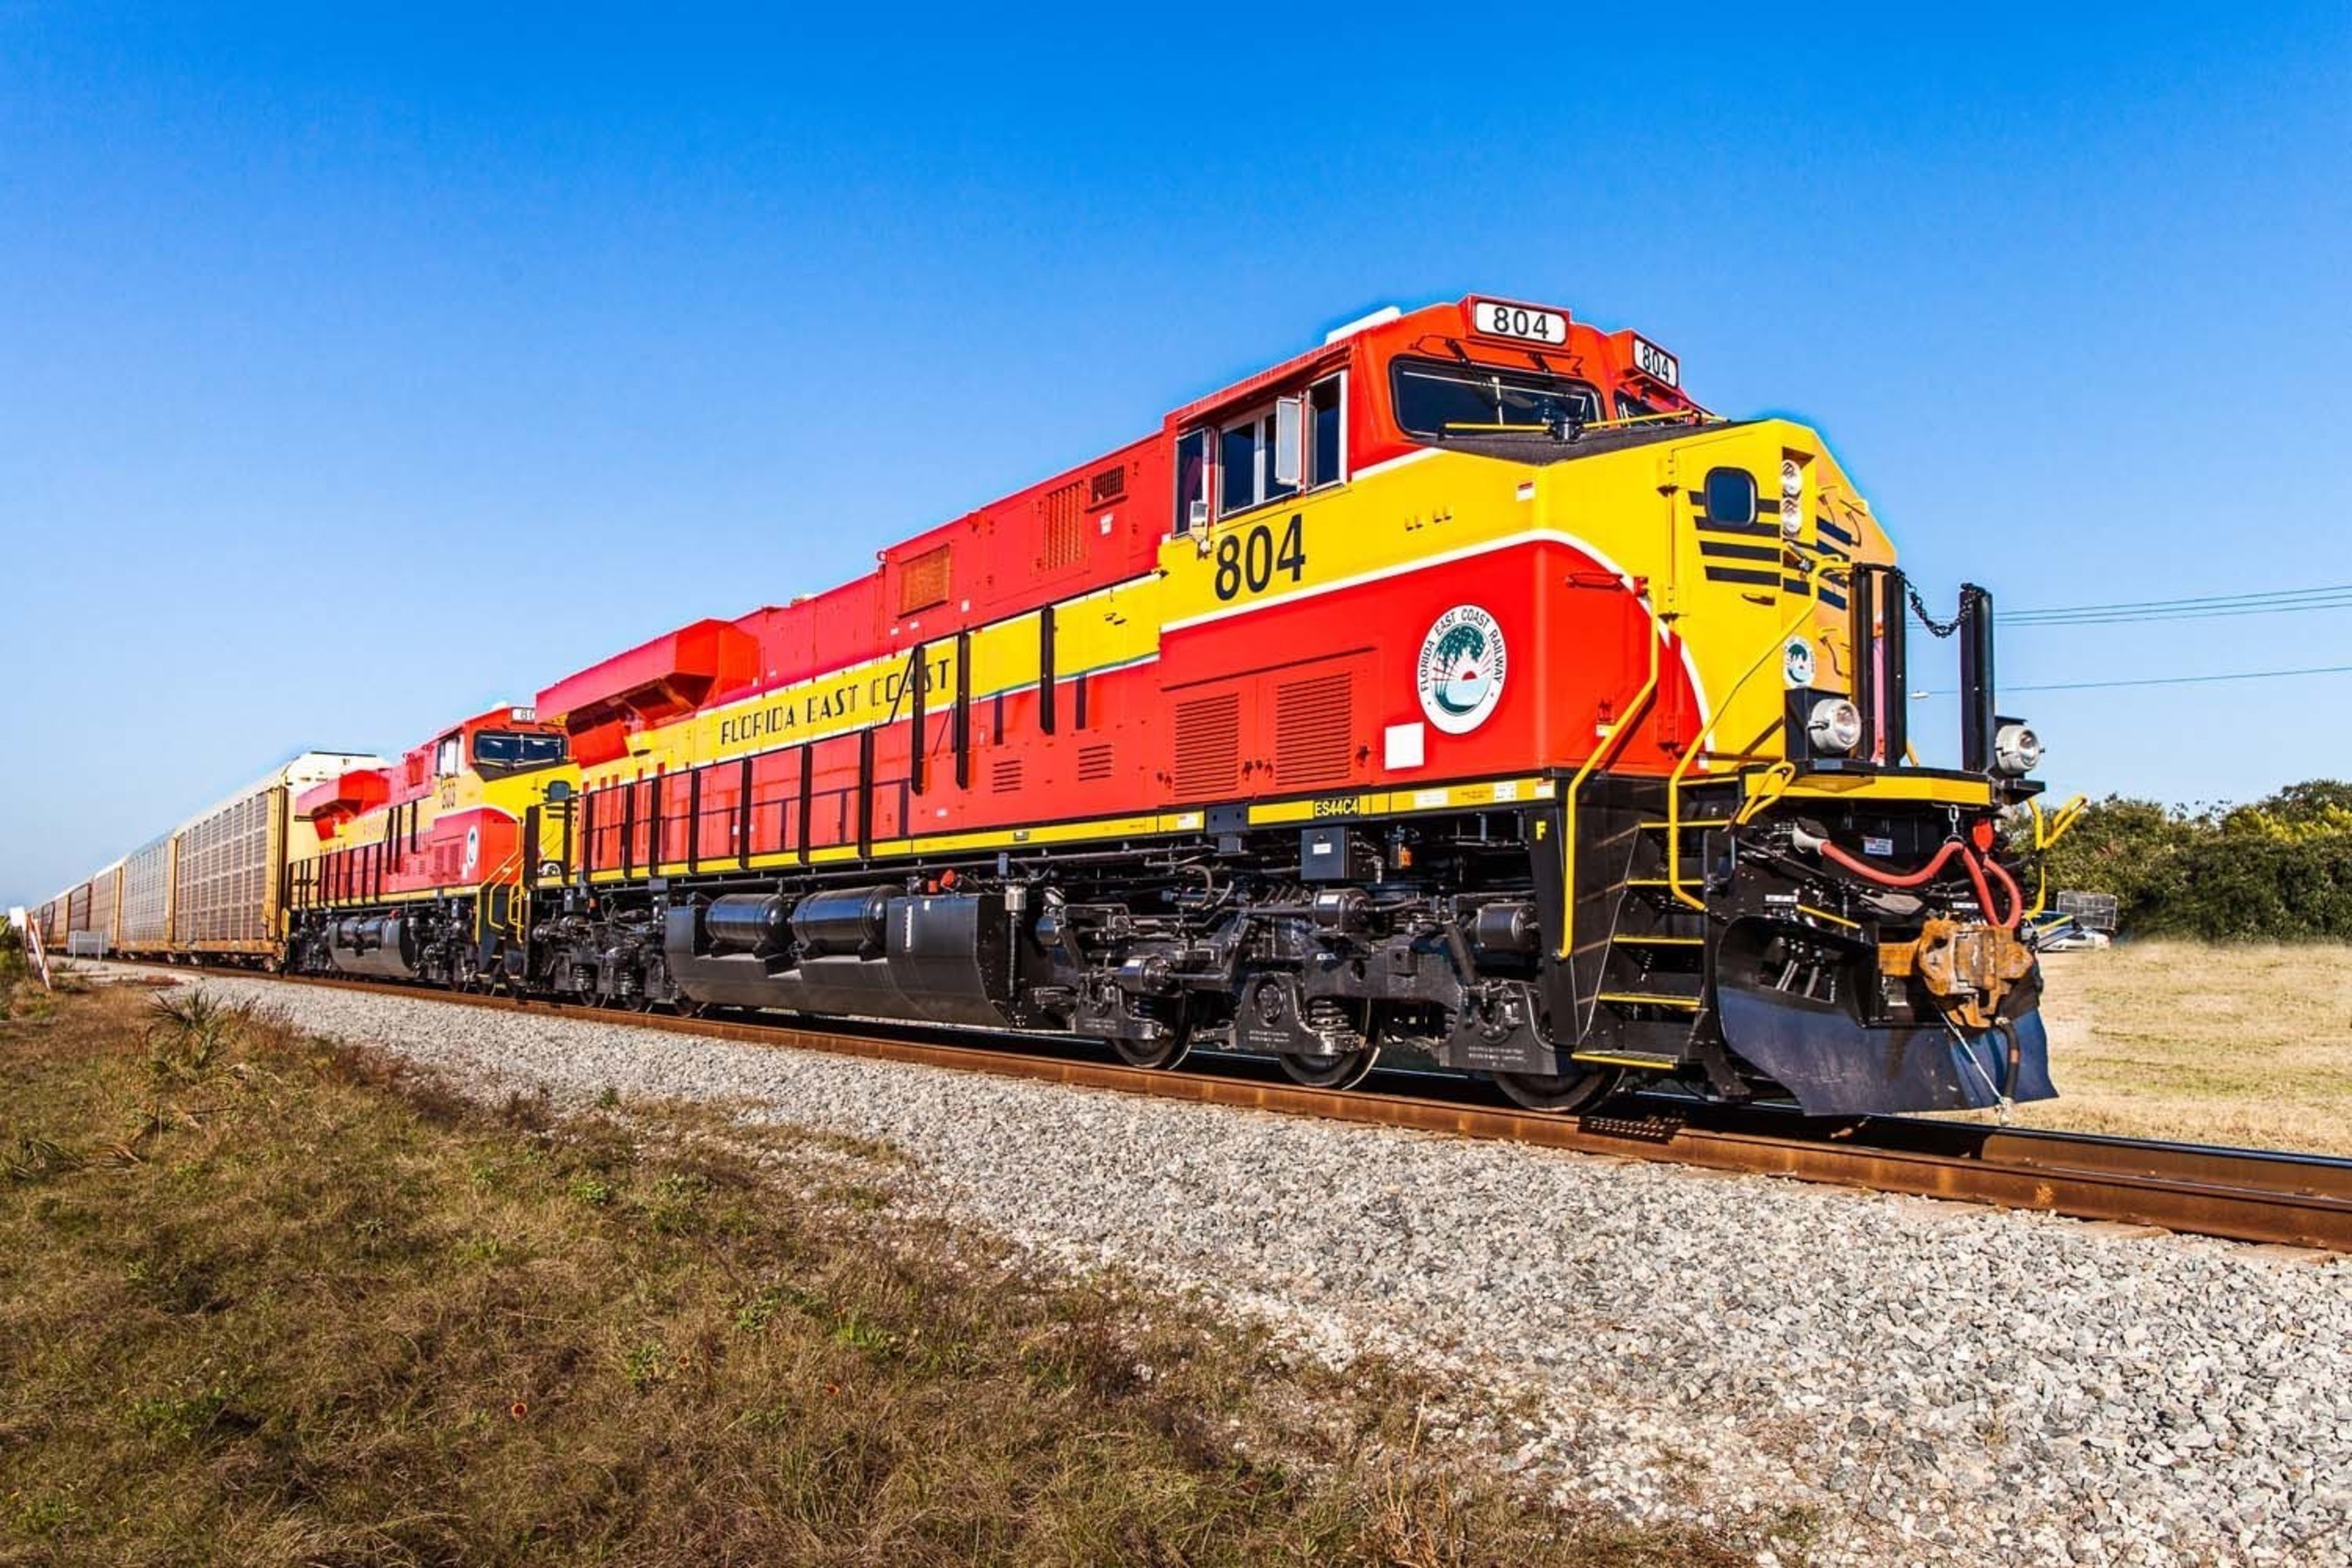 FECR's new Tier 3 locomotives on their inaugural run from Jacksonville to Miami, November 21, 2014.